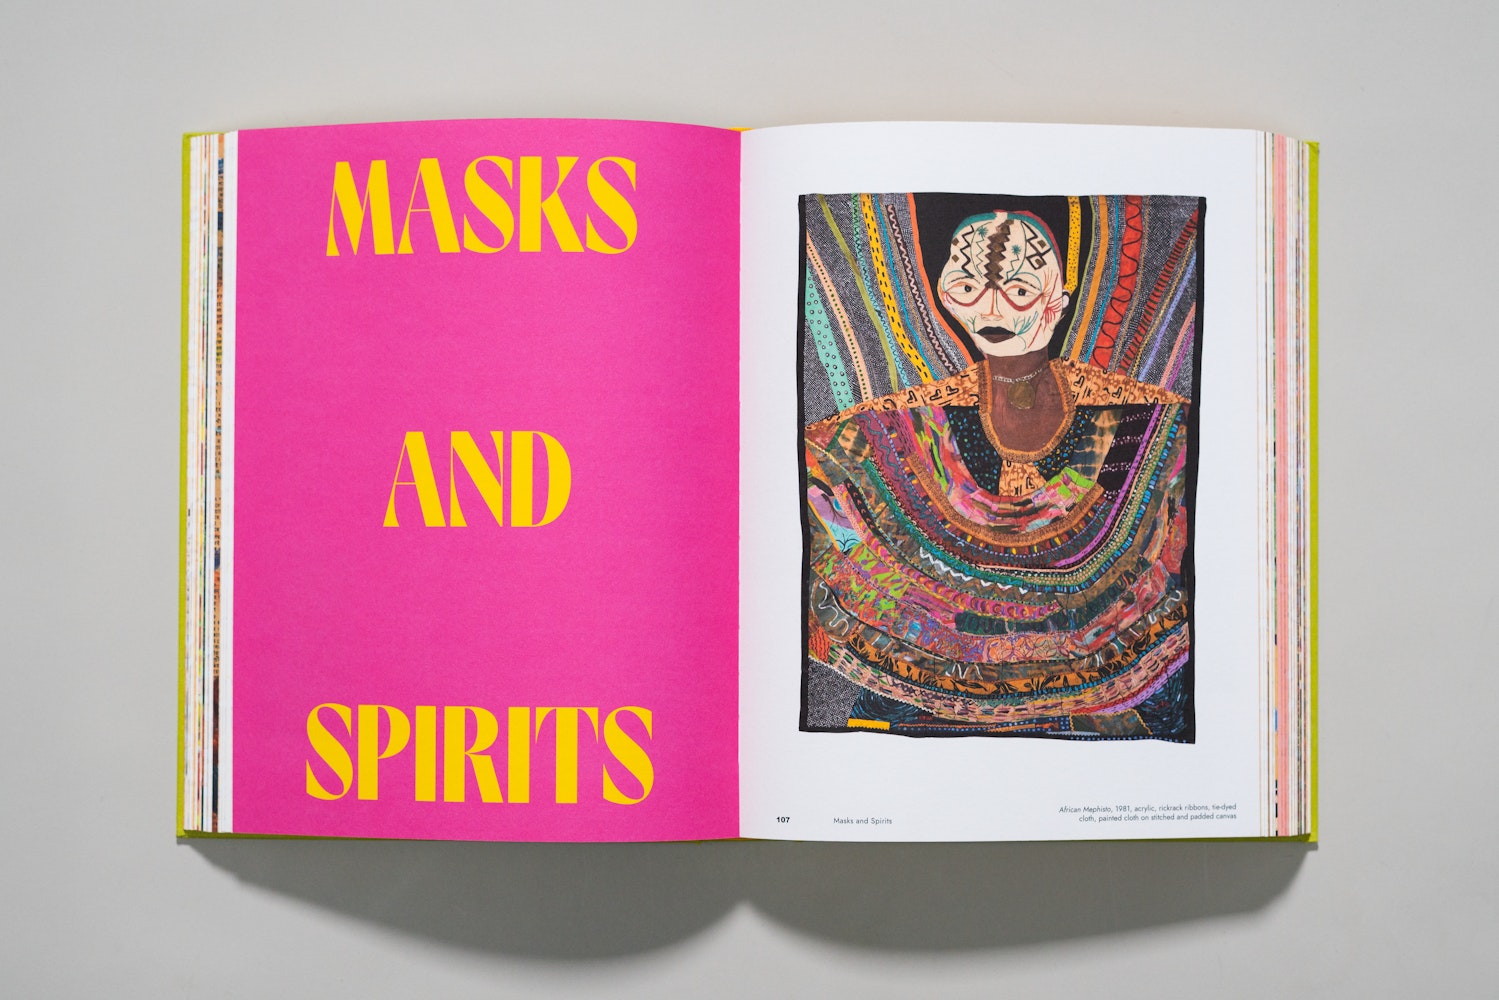 Spread of a large art book is open to a page of an essay with the title Masks and Spirits.